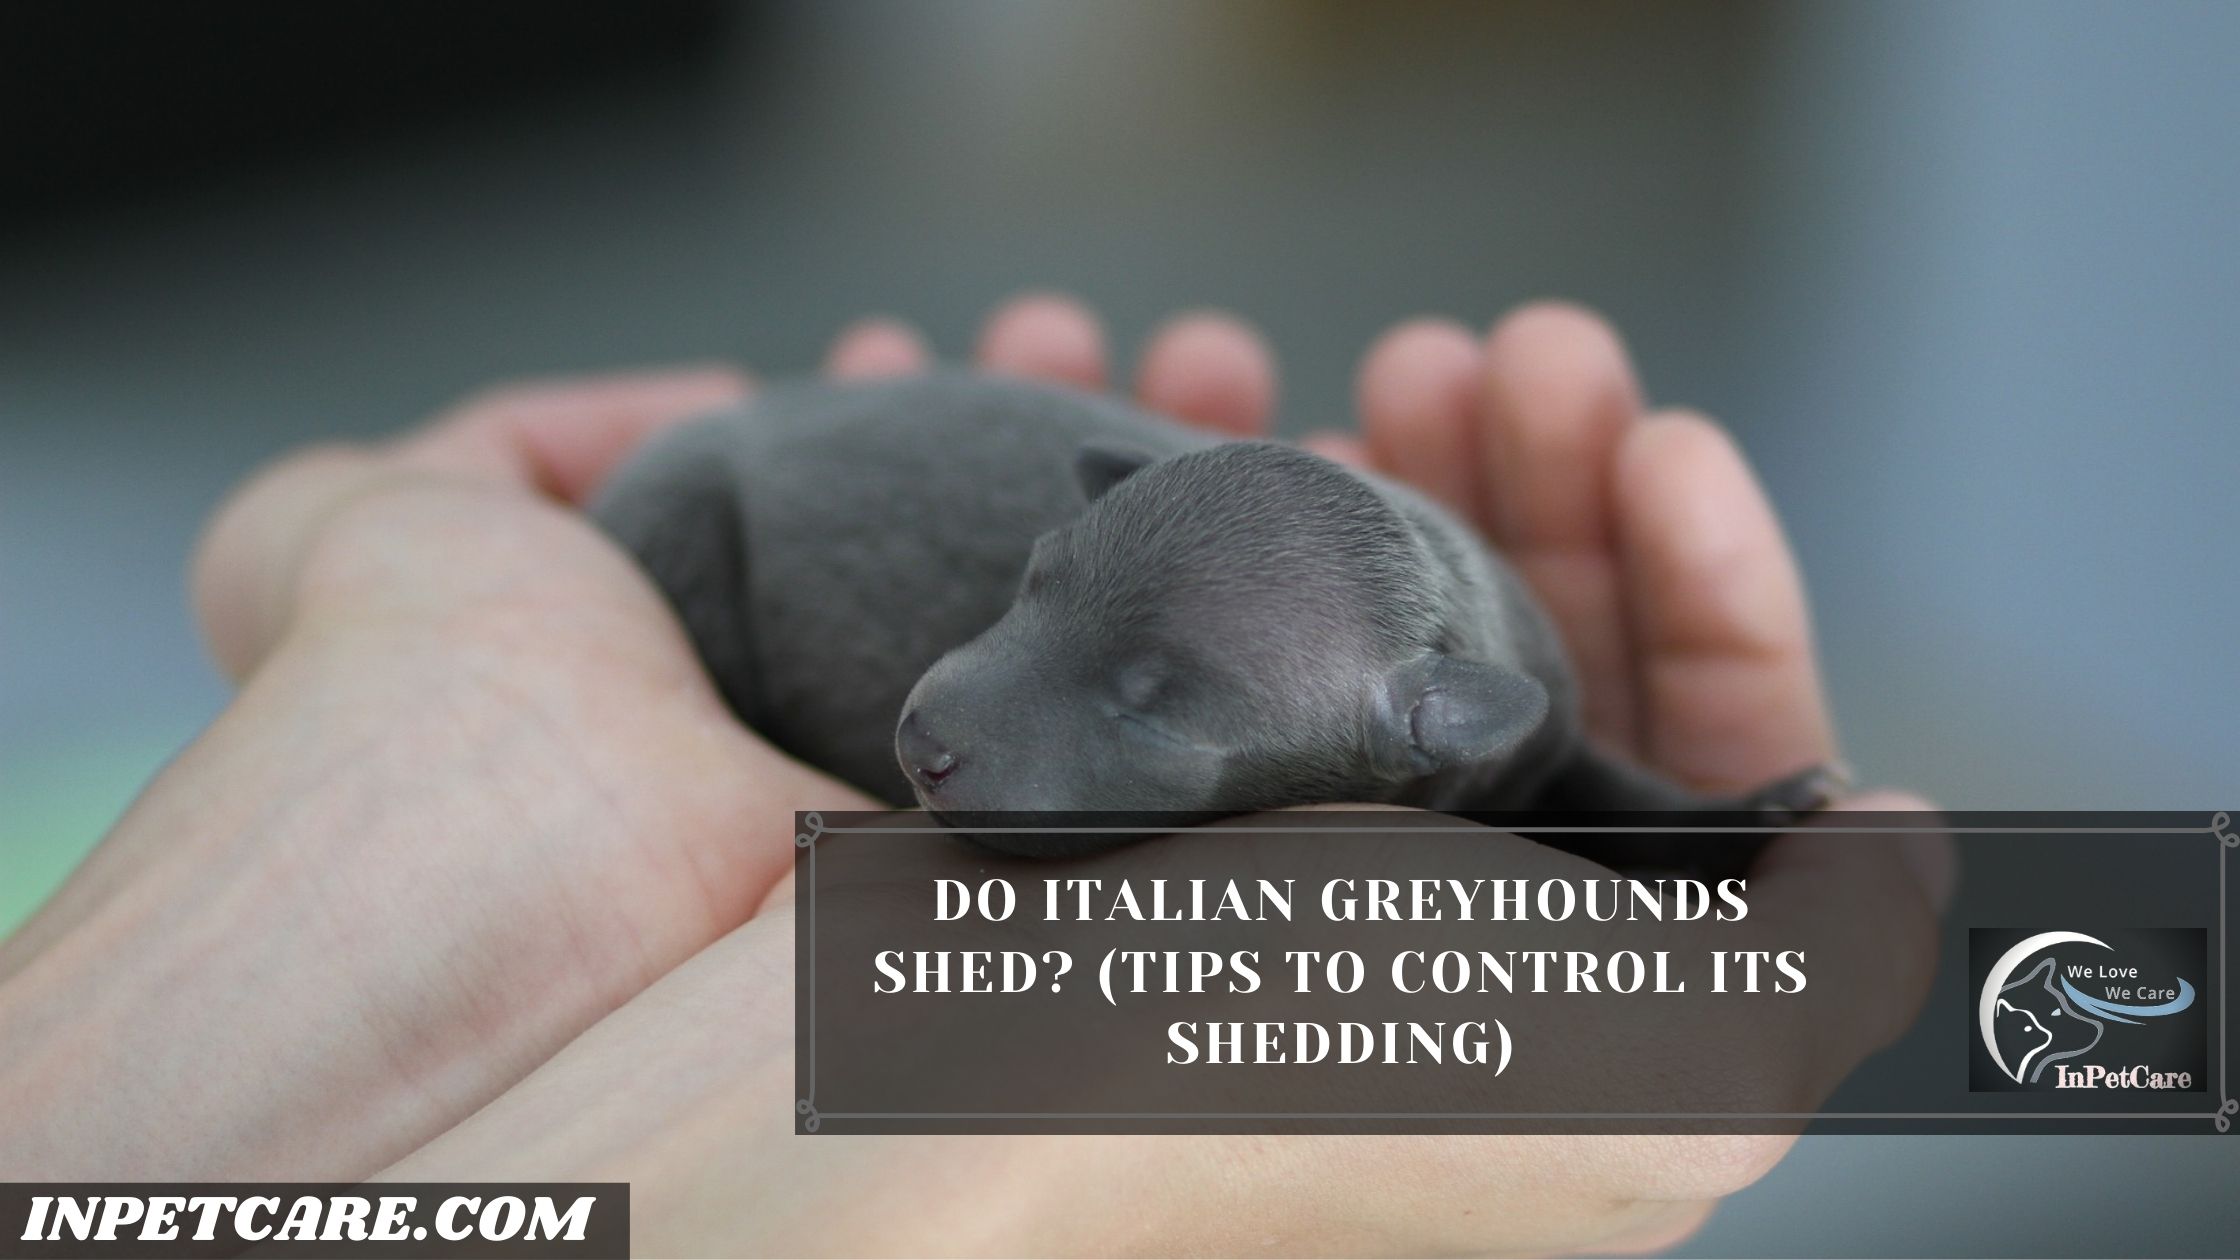 Do Italian Greyhounds Shed? (Tips To Control Its Shedding)